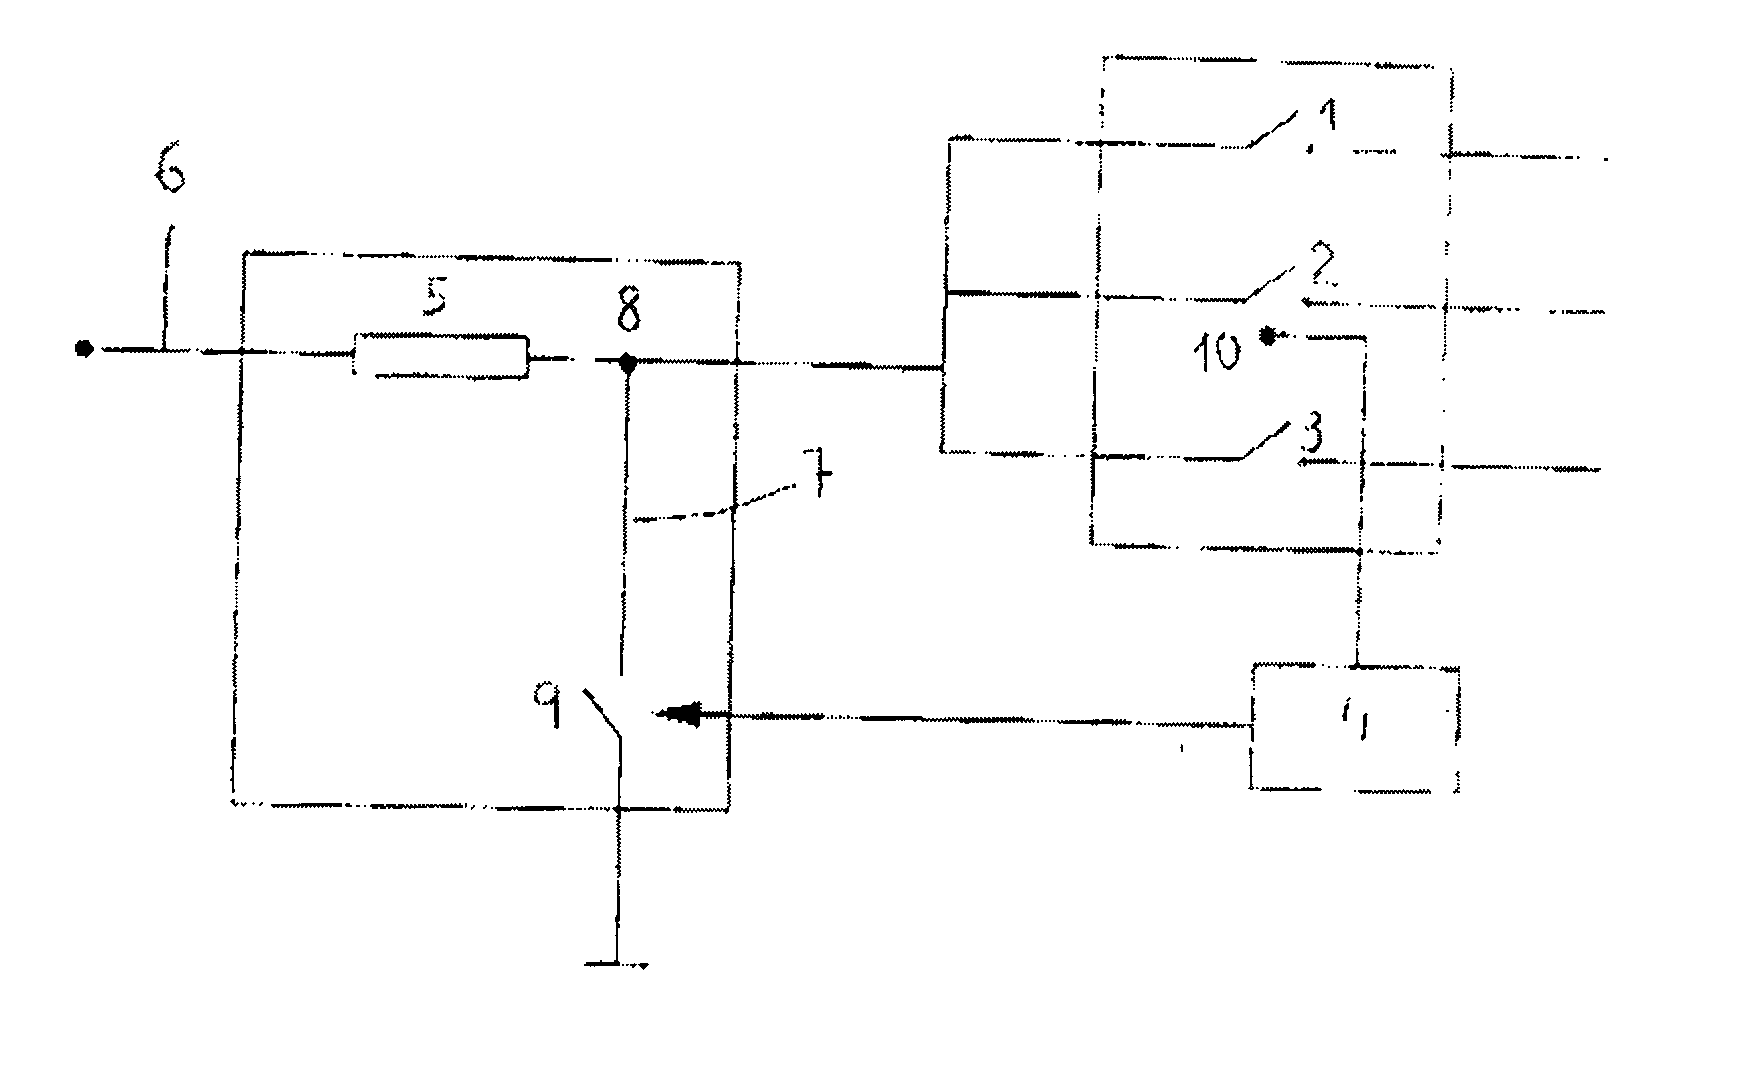 Active Safety Circuit with Loads Protected by Solid State Relays